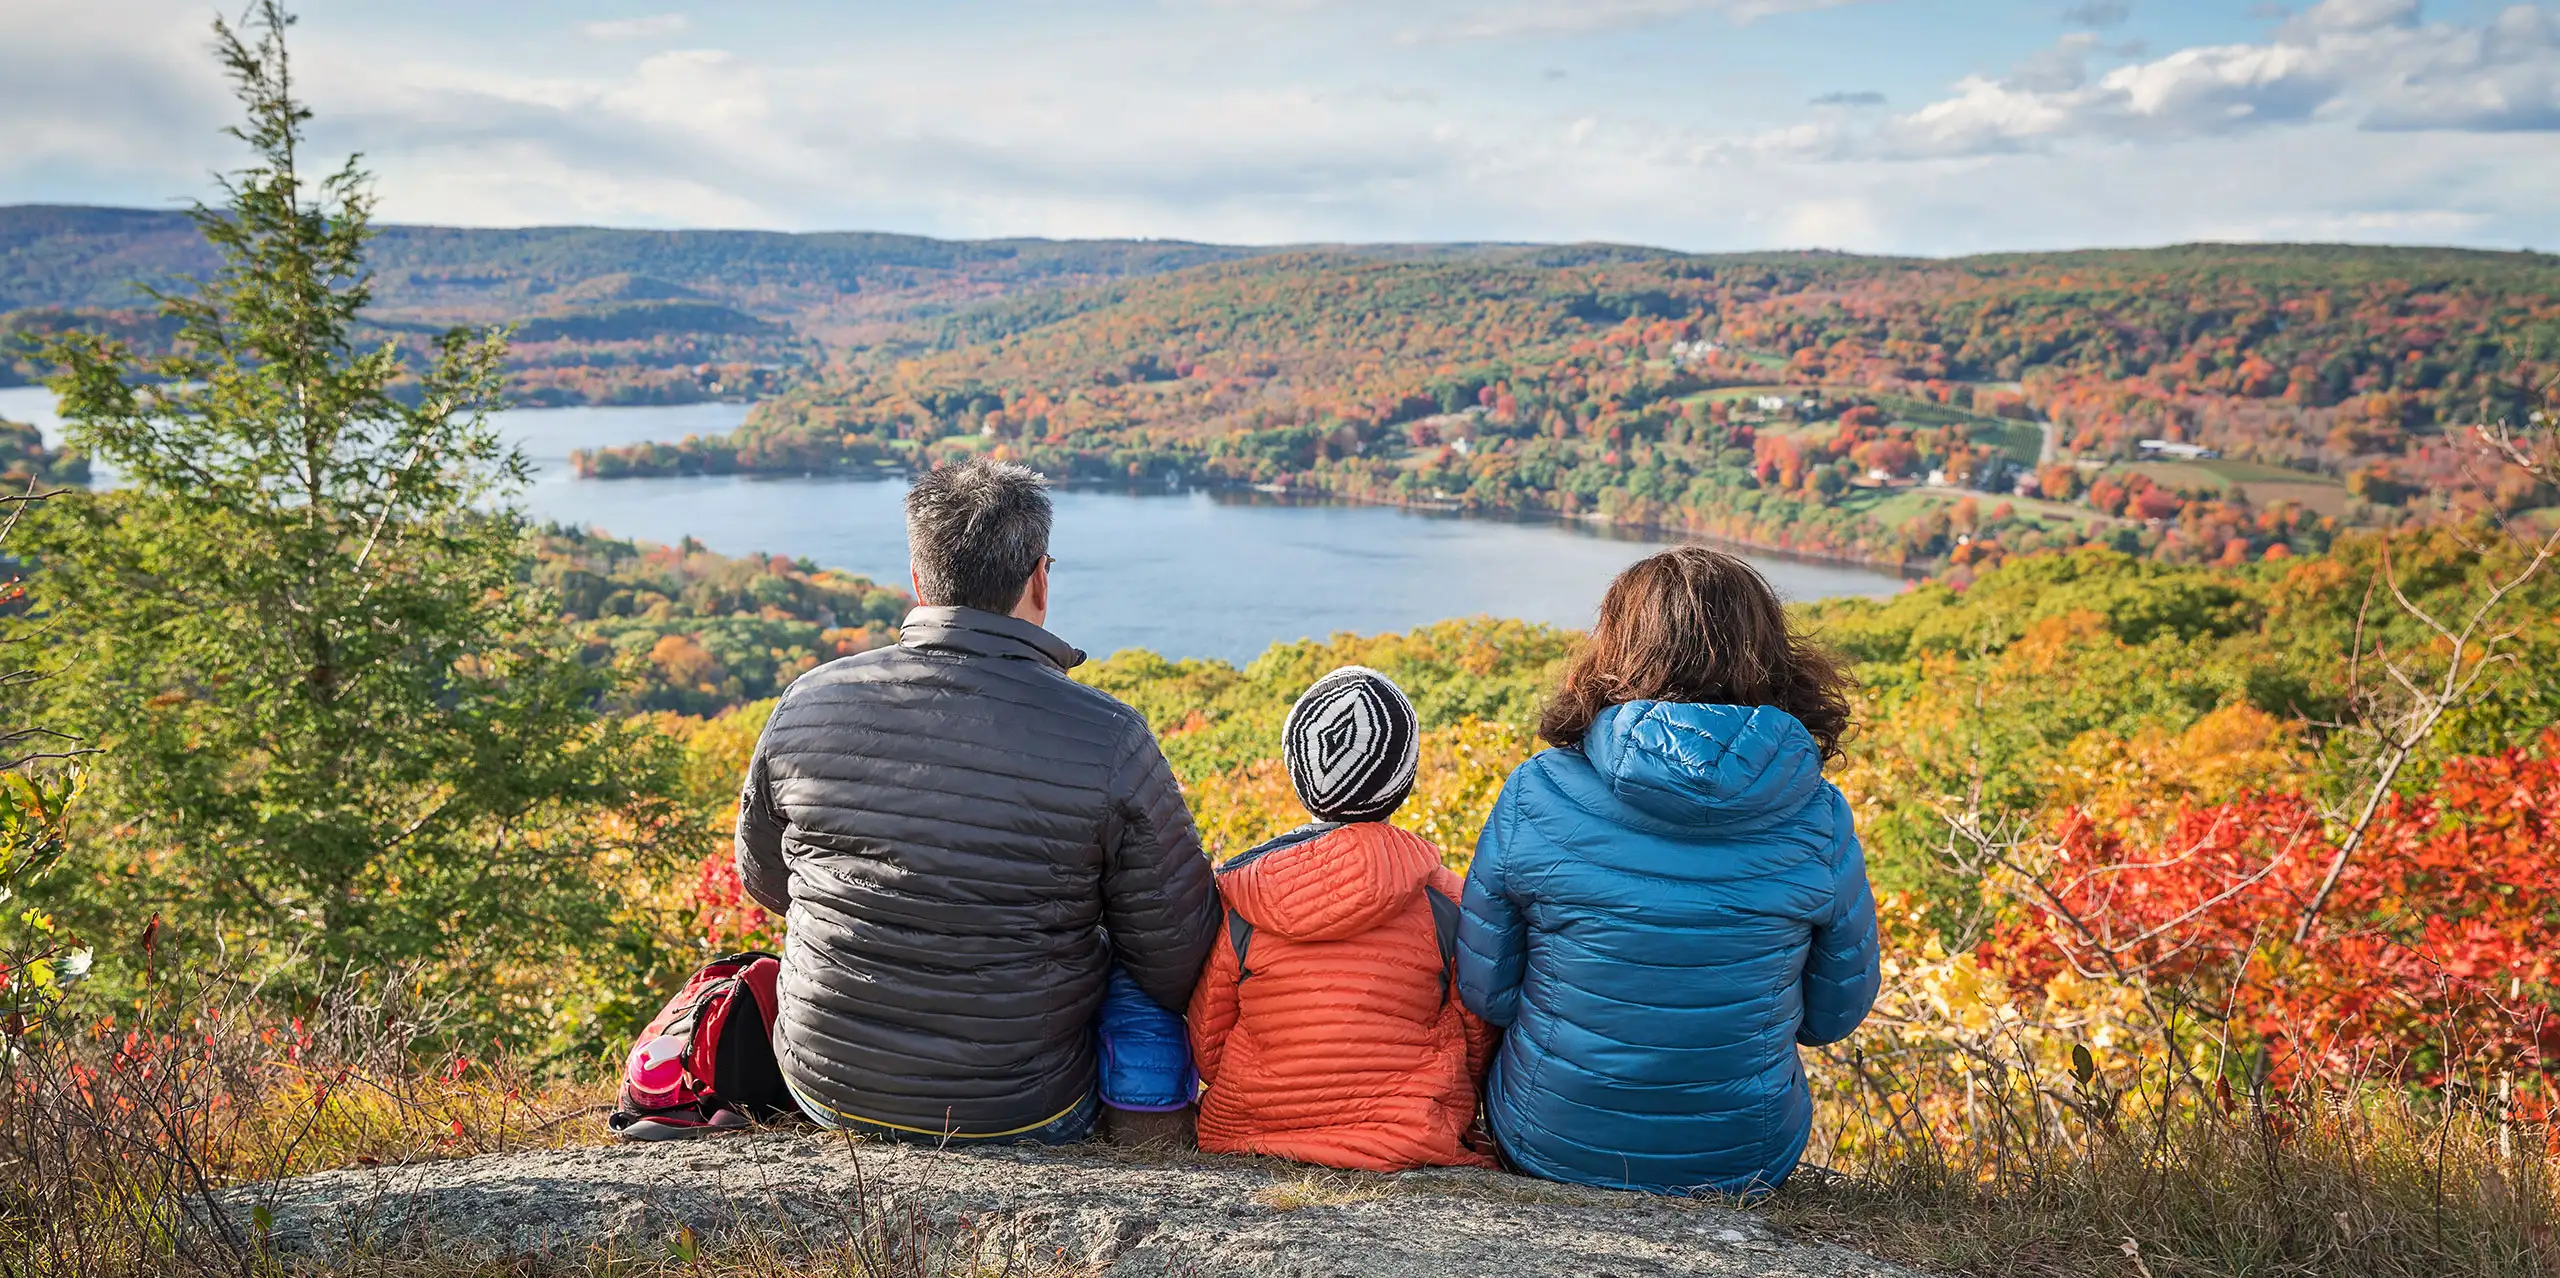 Family Overlooking a Lake in the Fall; Courtesy of Romiana Lee/Shutterstock.com